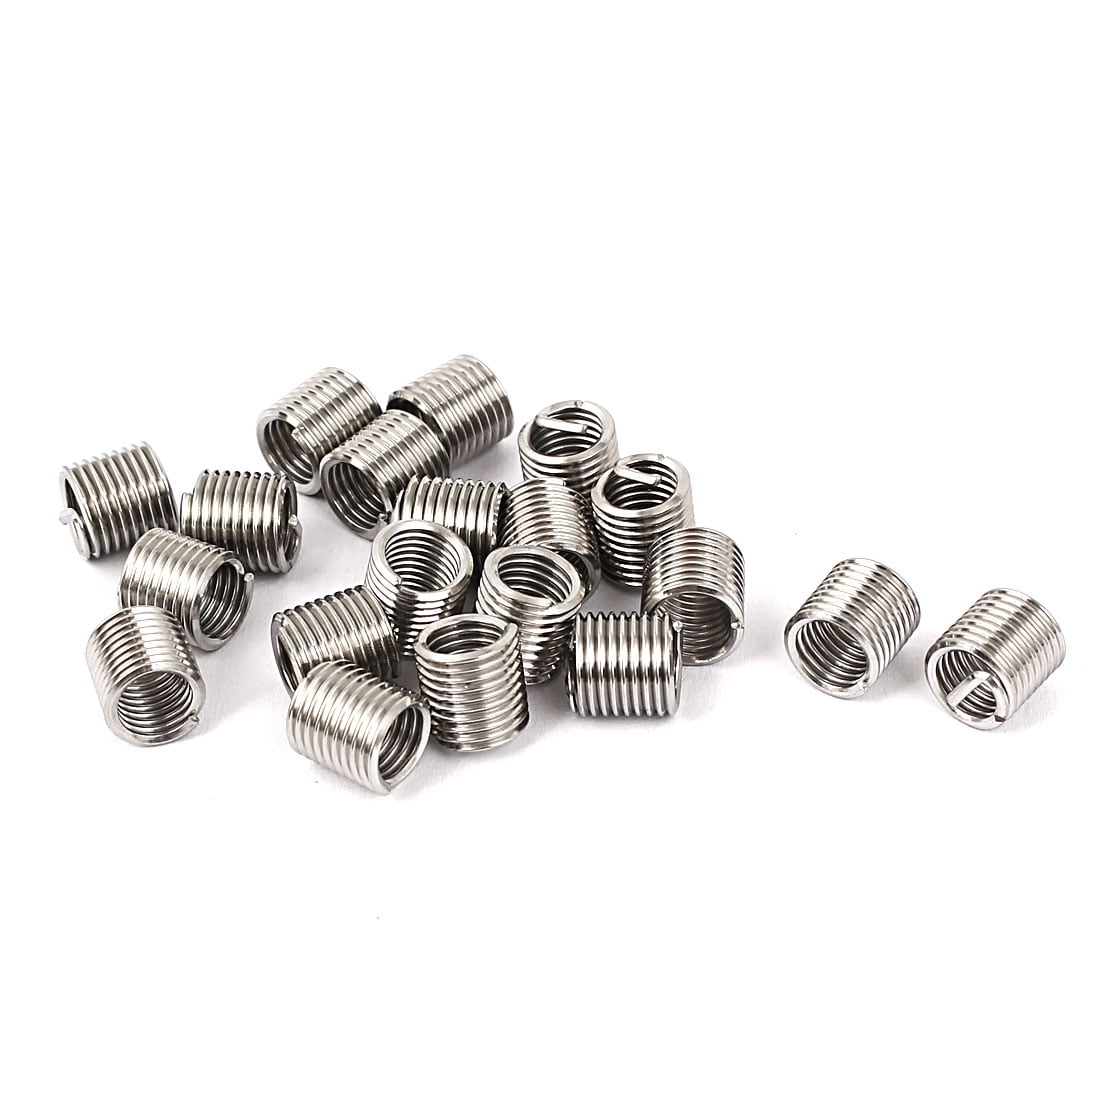 50pcs M5x0.8x3D Metric Helicoil Screw Thread Wire Inserts 304 Stainless Steel 